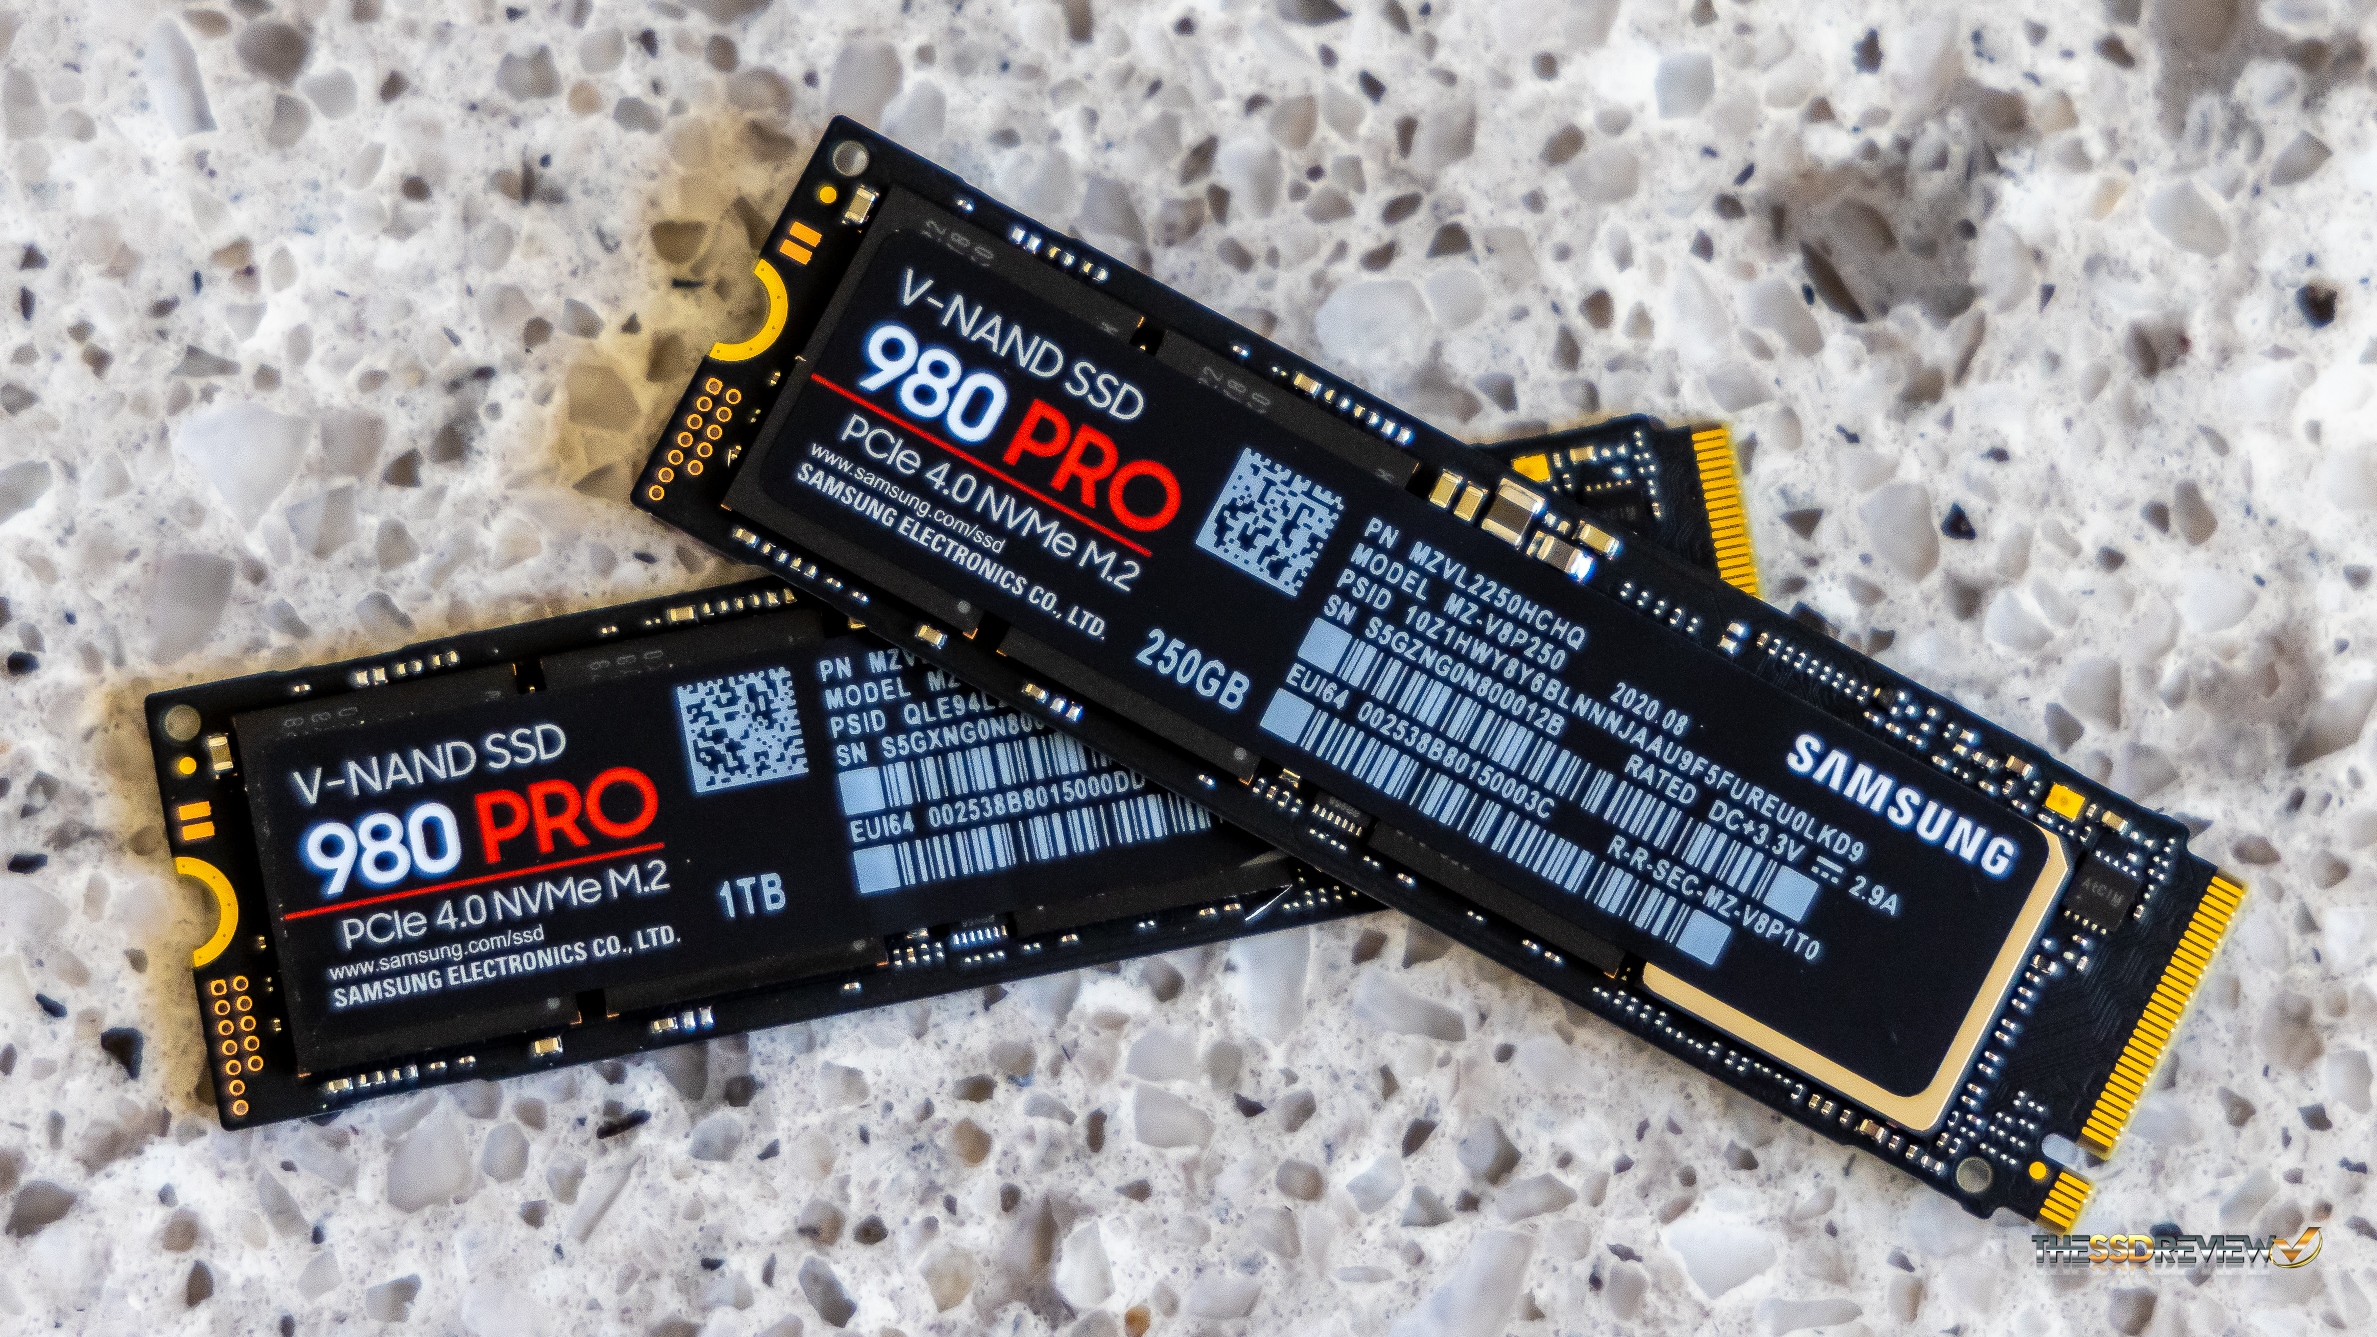 Samsung 980 Pro SSD Review – One of the fastest PCIe 4.0 SSDs in